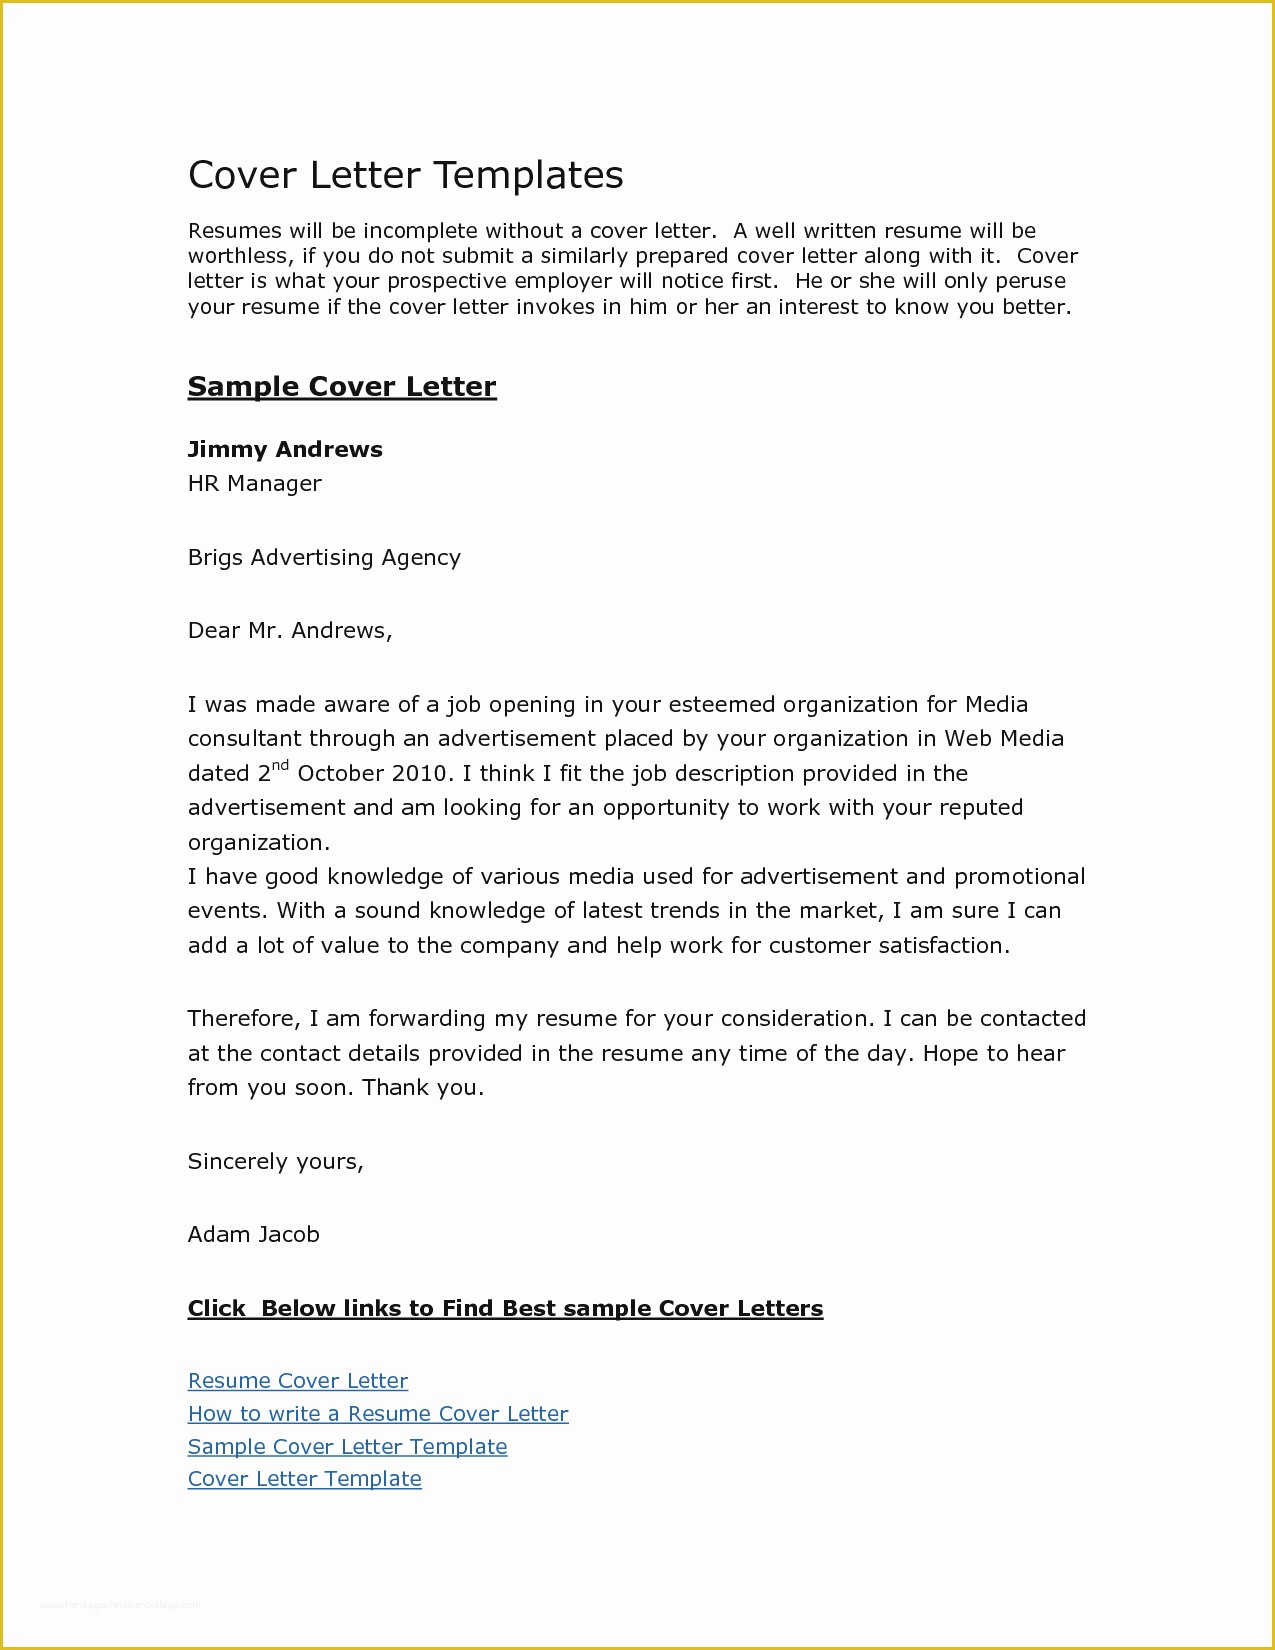 Free Resume Cover Letter Template Of Sample Resume Cover Letters Free Resume Ideas